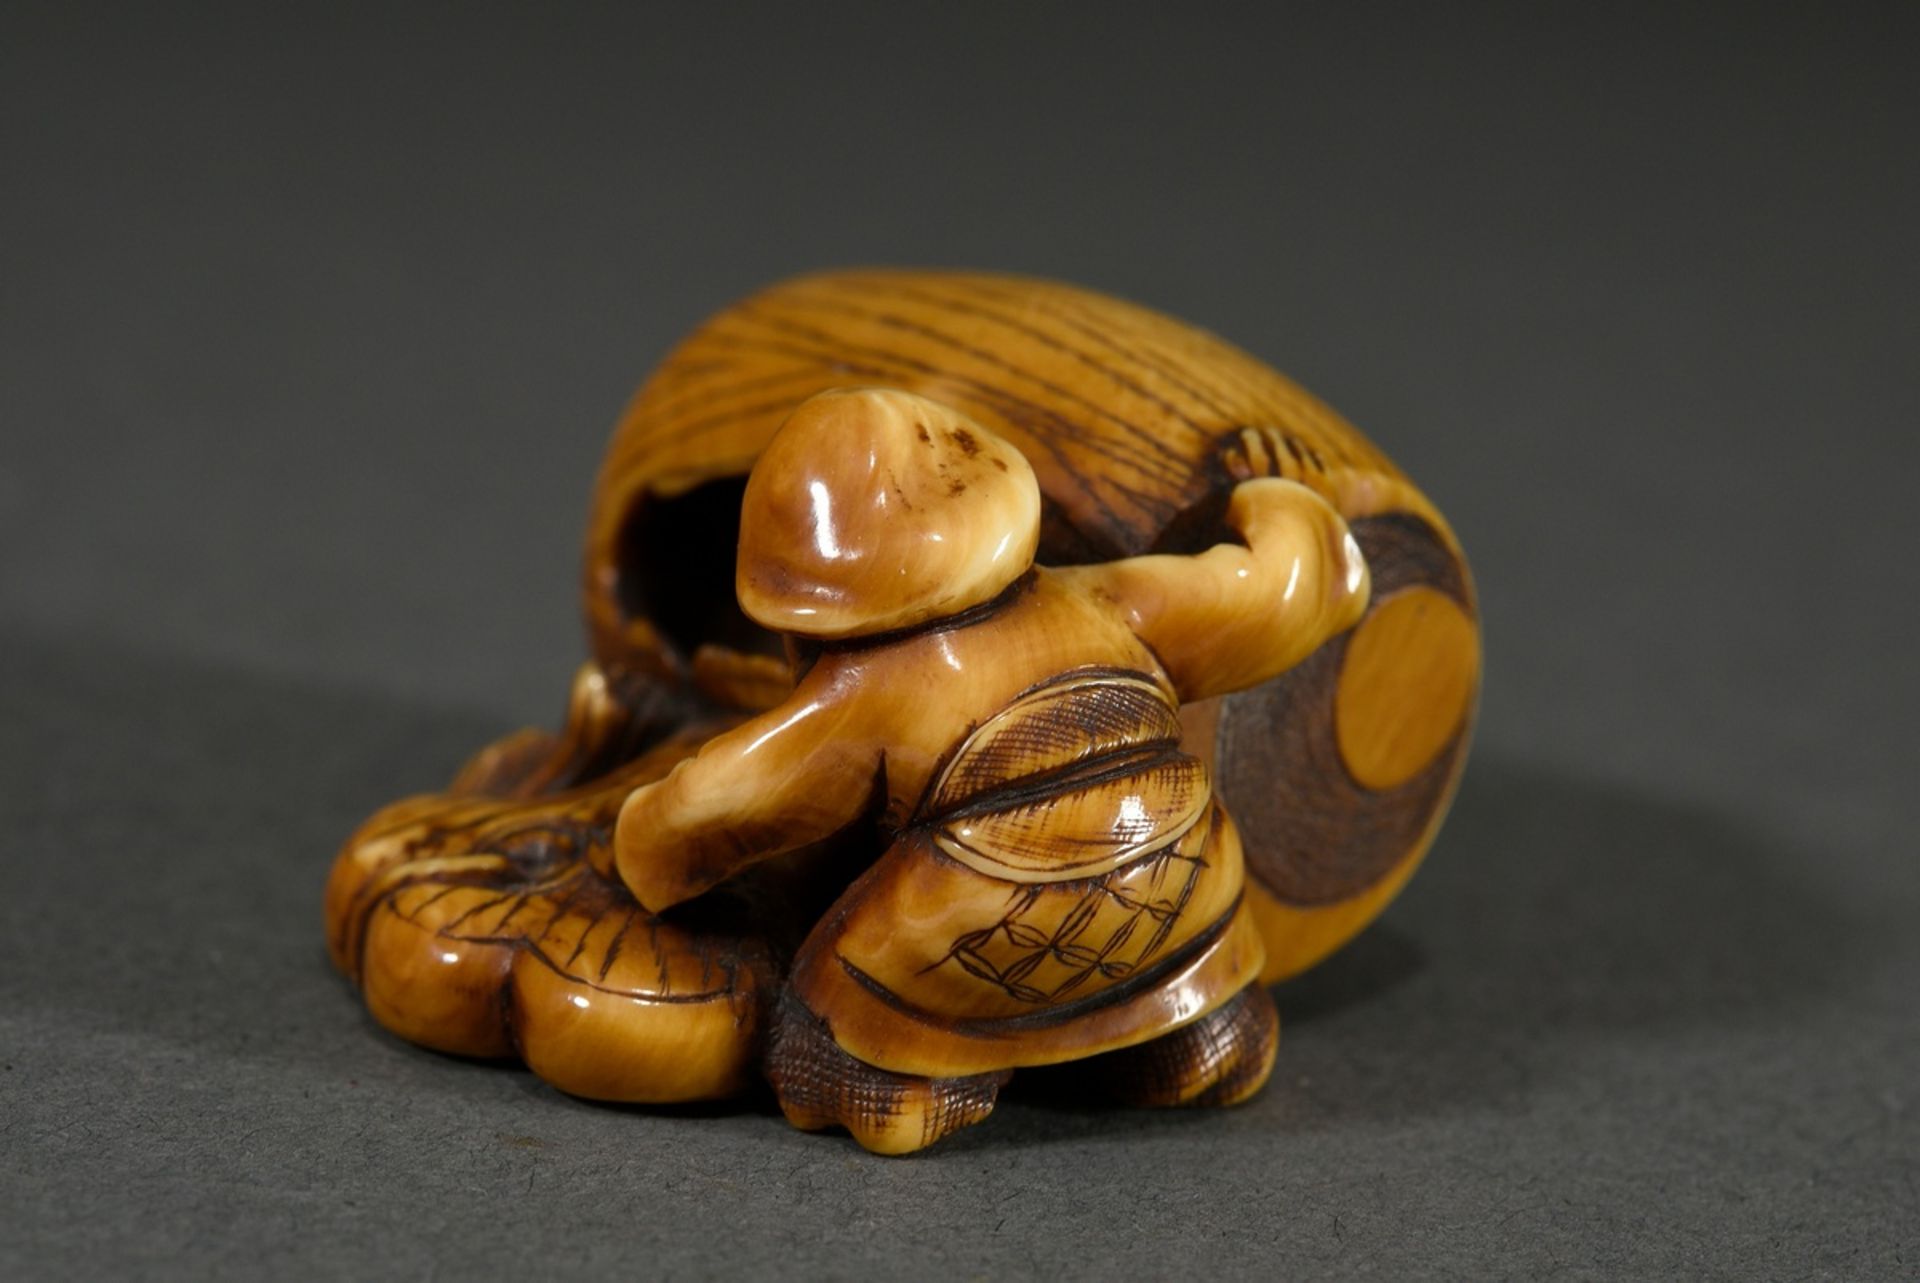 Ivory netsuke "Daikoku with huge rotten lucky hammer", patinated, incised signature, 4x5x2,5cm, per - Image 4 of 7